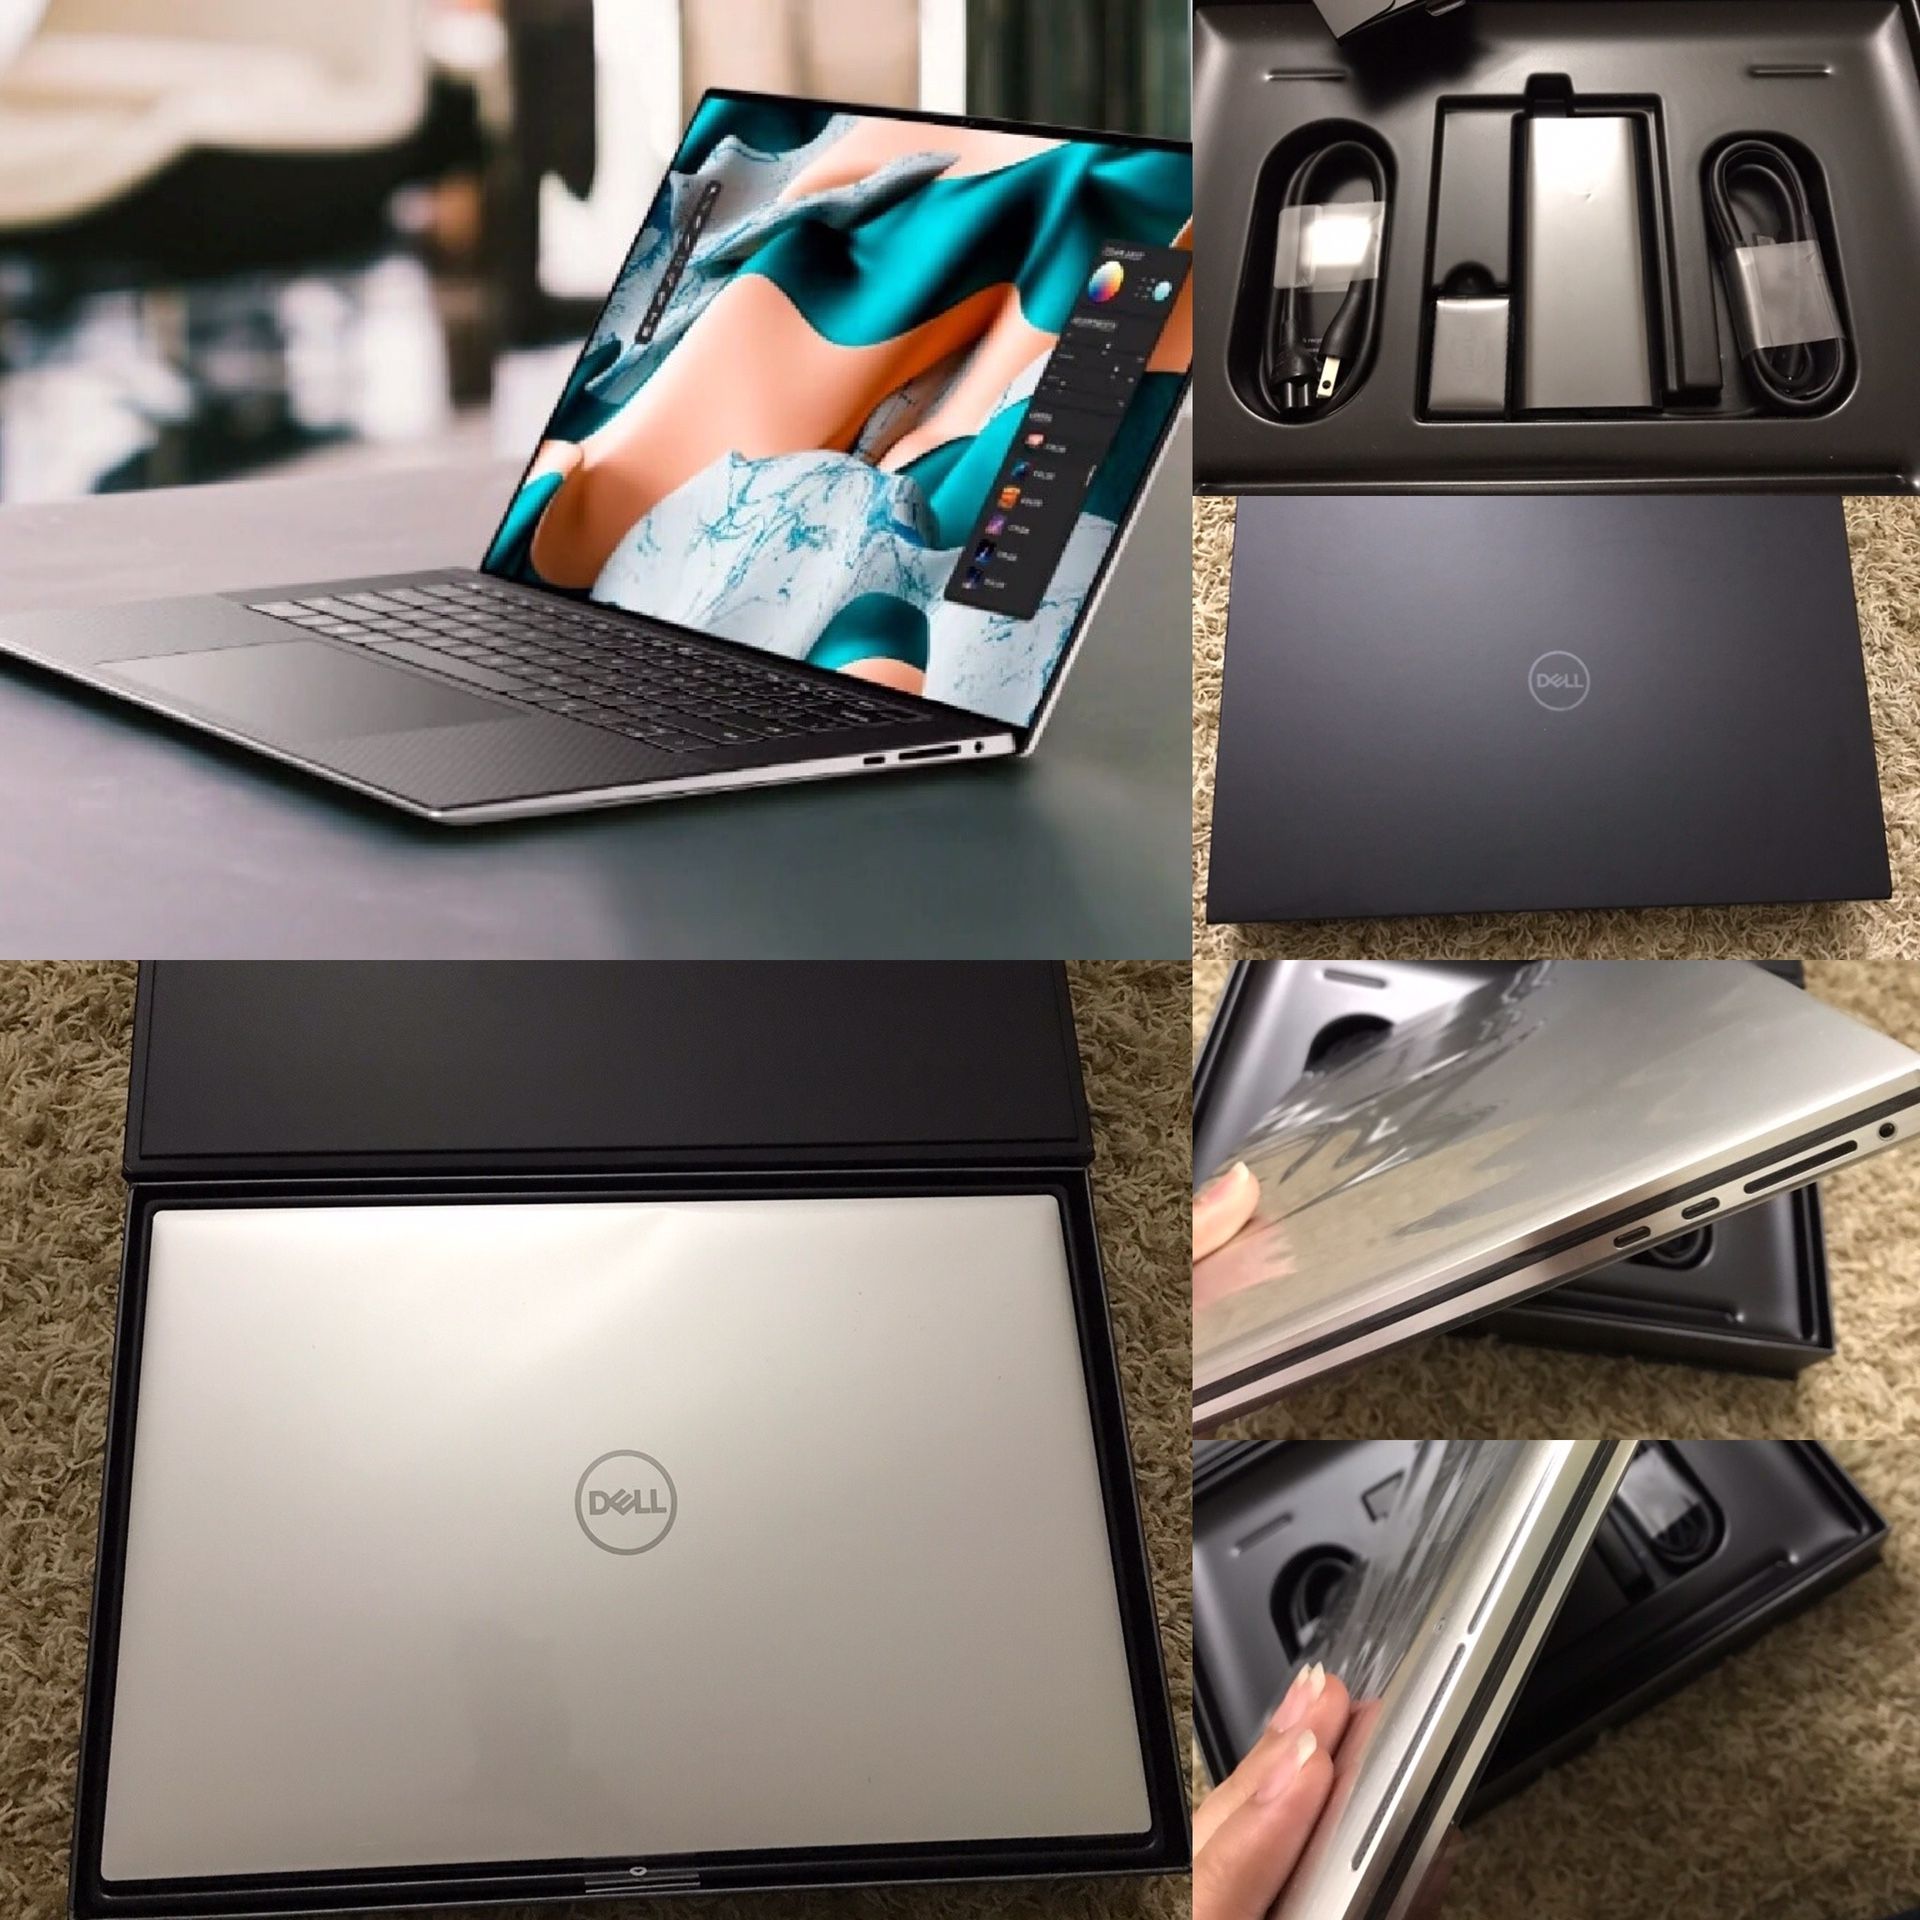 ✅BRAND NEW in BOX ❤️ DELL XPS 17" 9700 ✅10th gen Intel Core i7 -10750H (12MB cache) 6 Cores up-to 5.0 Ghz✅ 16GB DDR4 RAM 🏆 NVIDIA GeForce GTX 1650 Ti